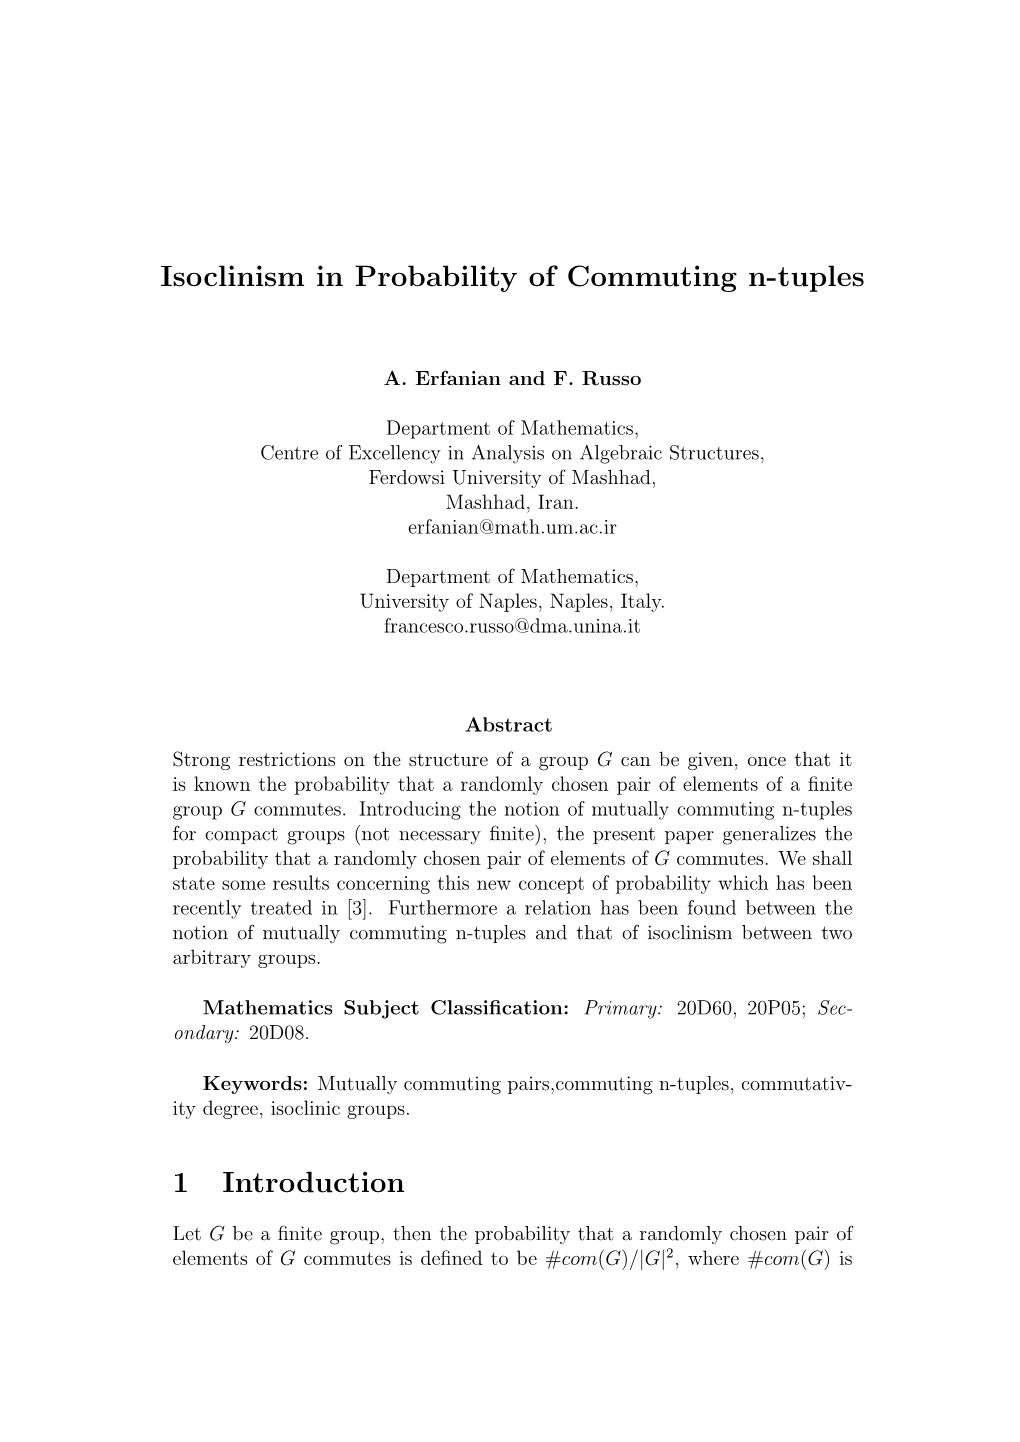 Isoclinism in Probability of Commuting N-Tuples 1 Introduction